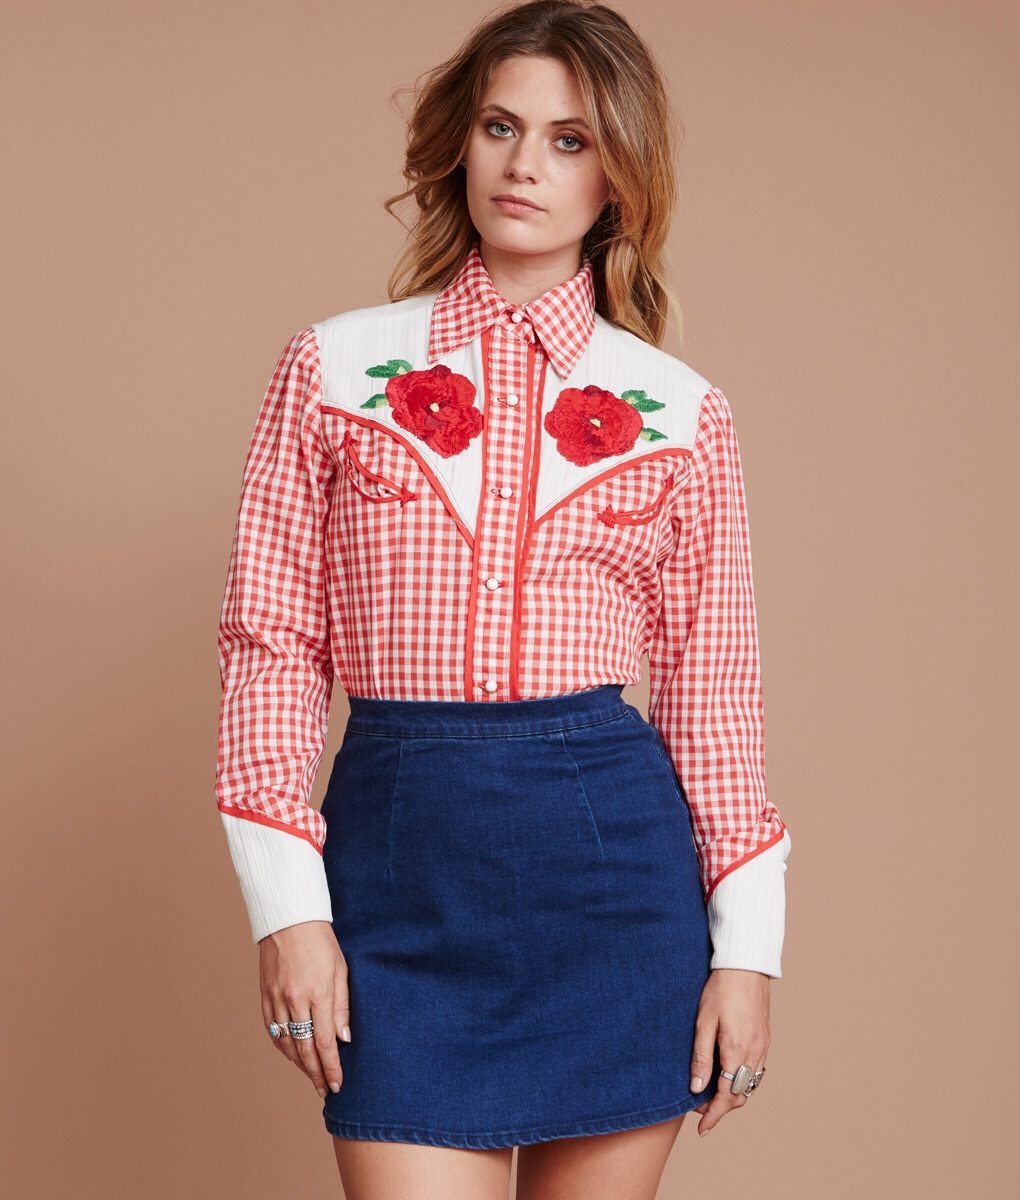 Vintage Embroidered Western Snap Button Shirts are popular in Chicago